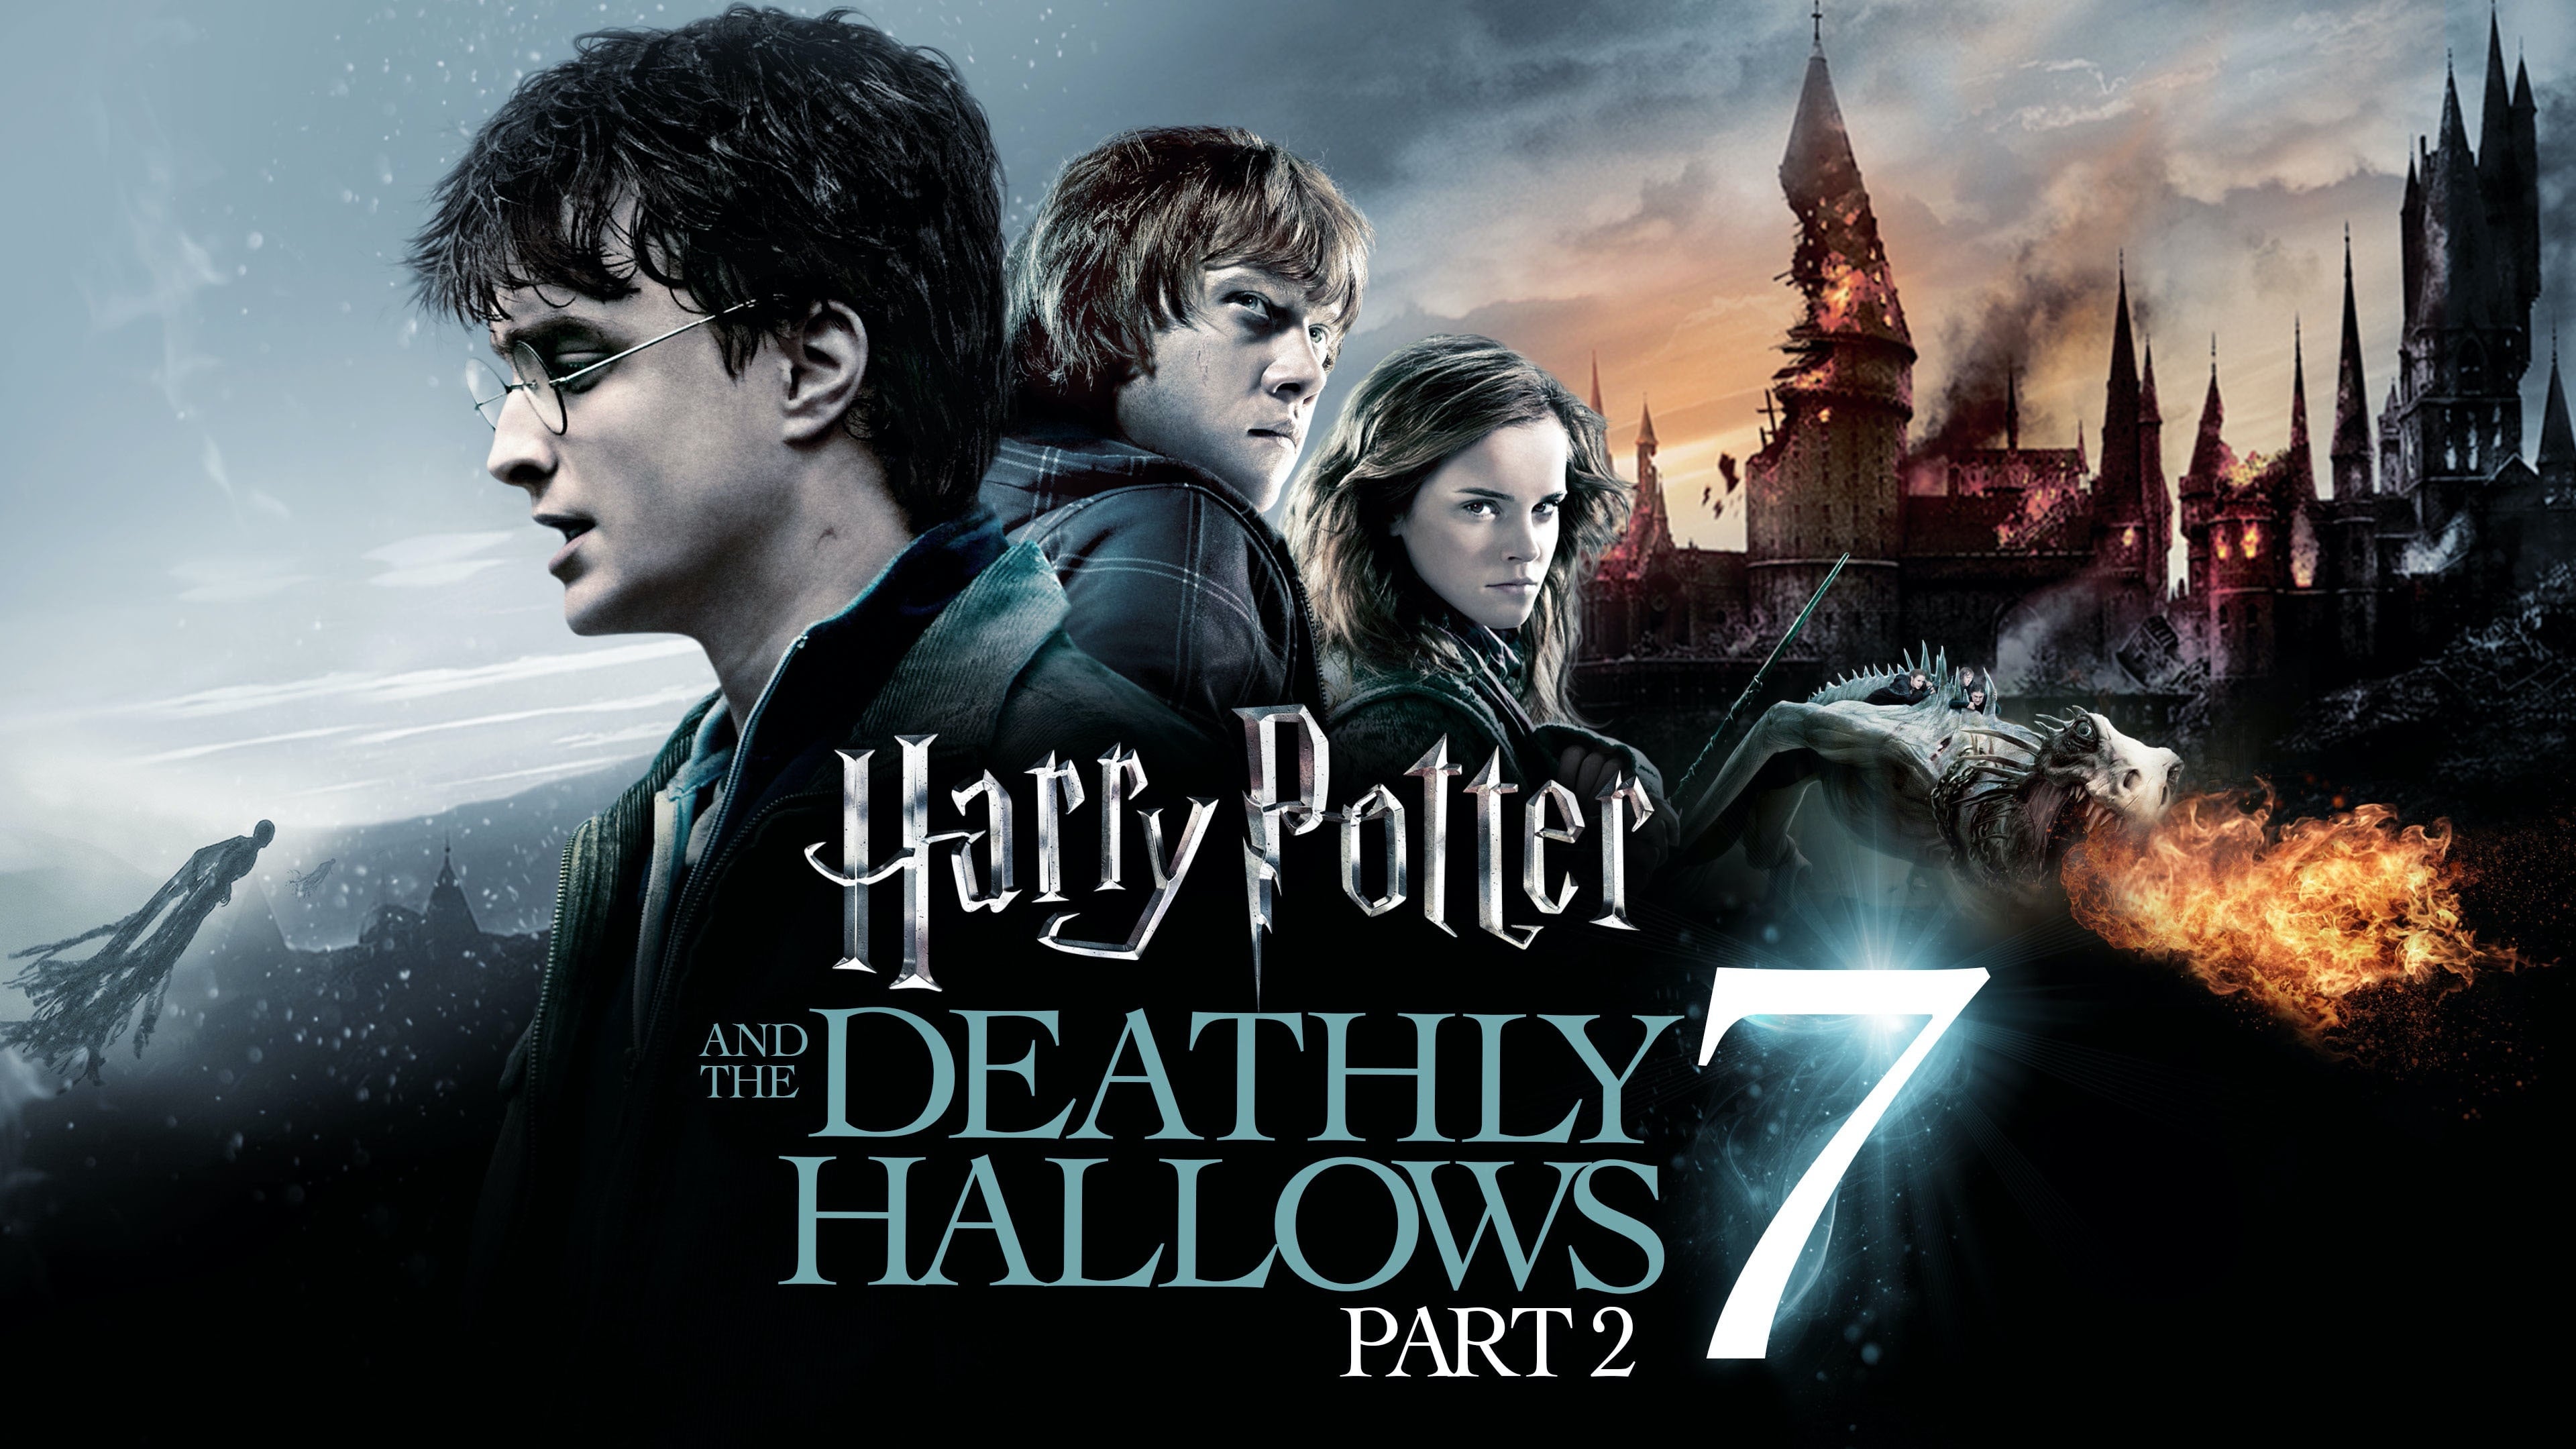 Harry Potter and the Deathly Hallows: Part 2 (2011) - AZ Movies